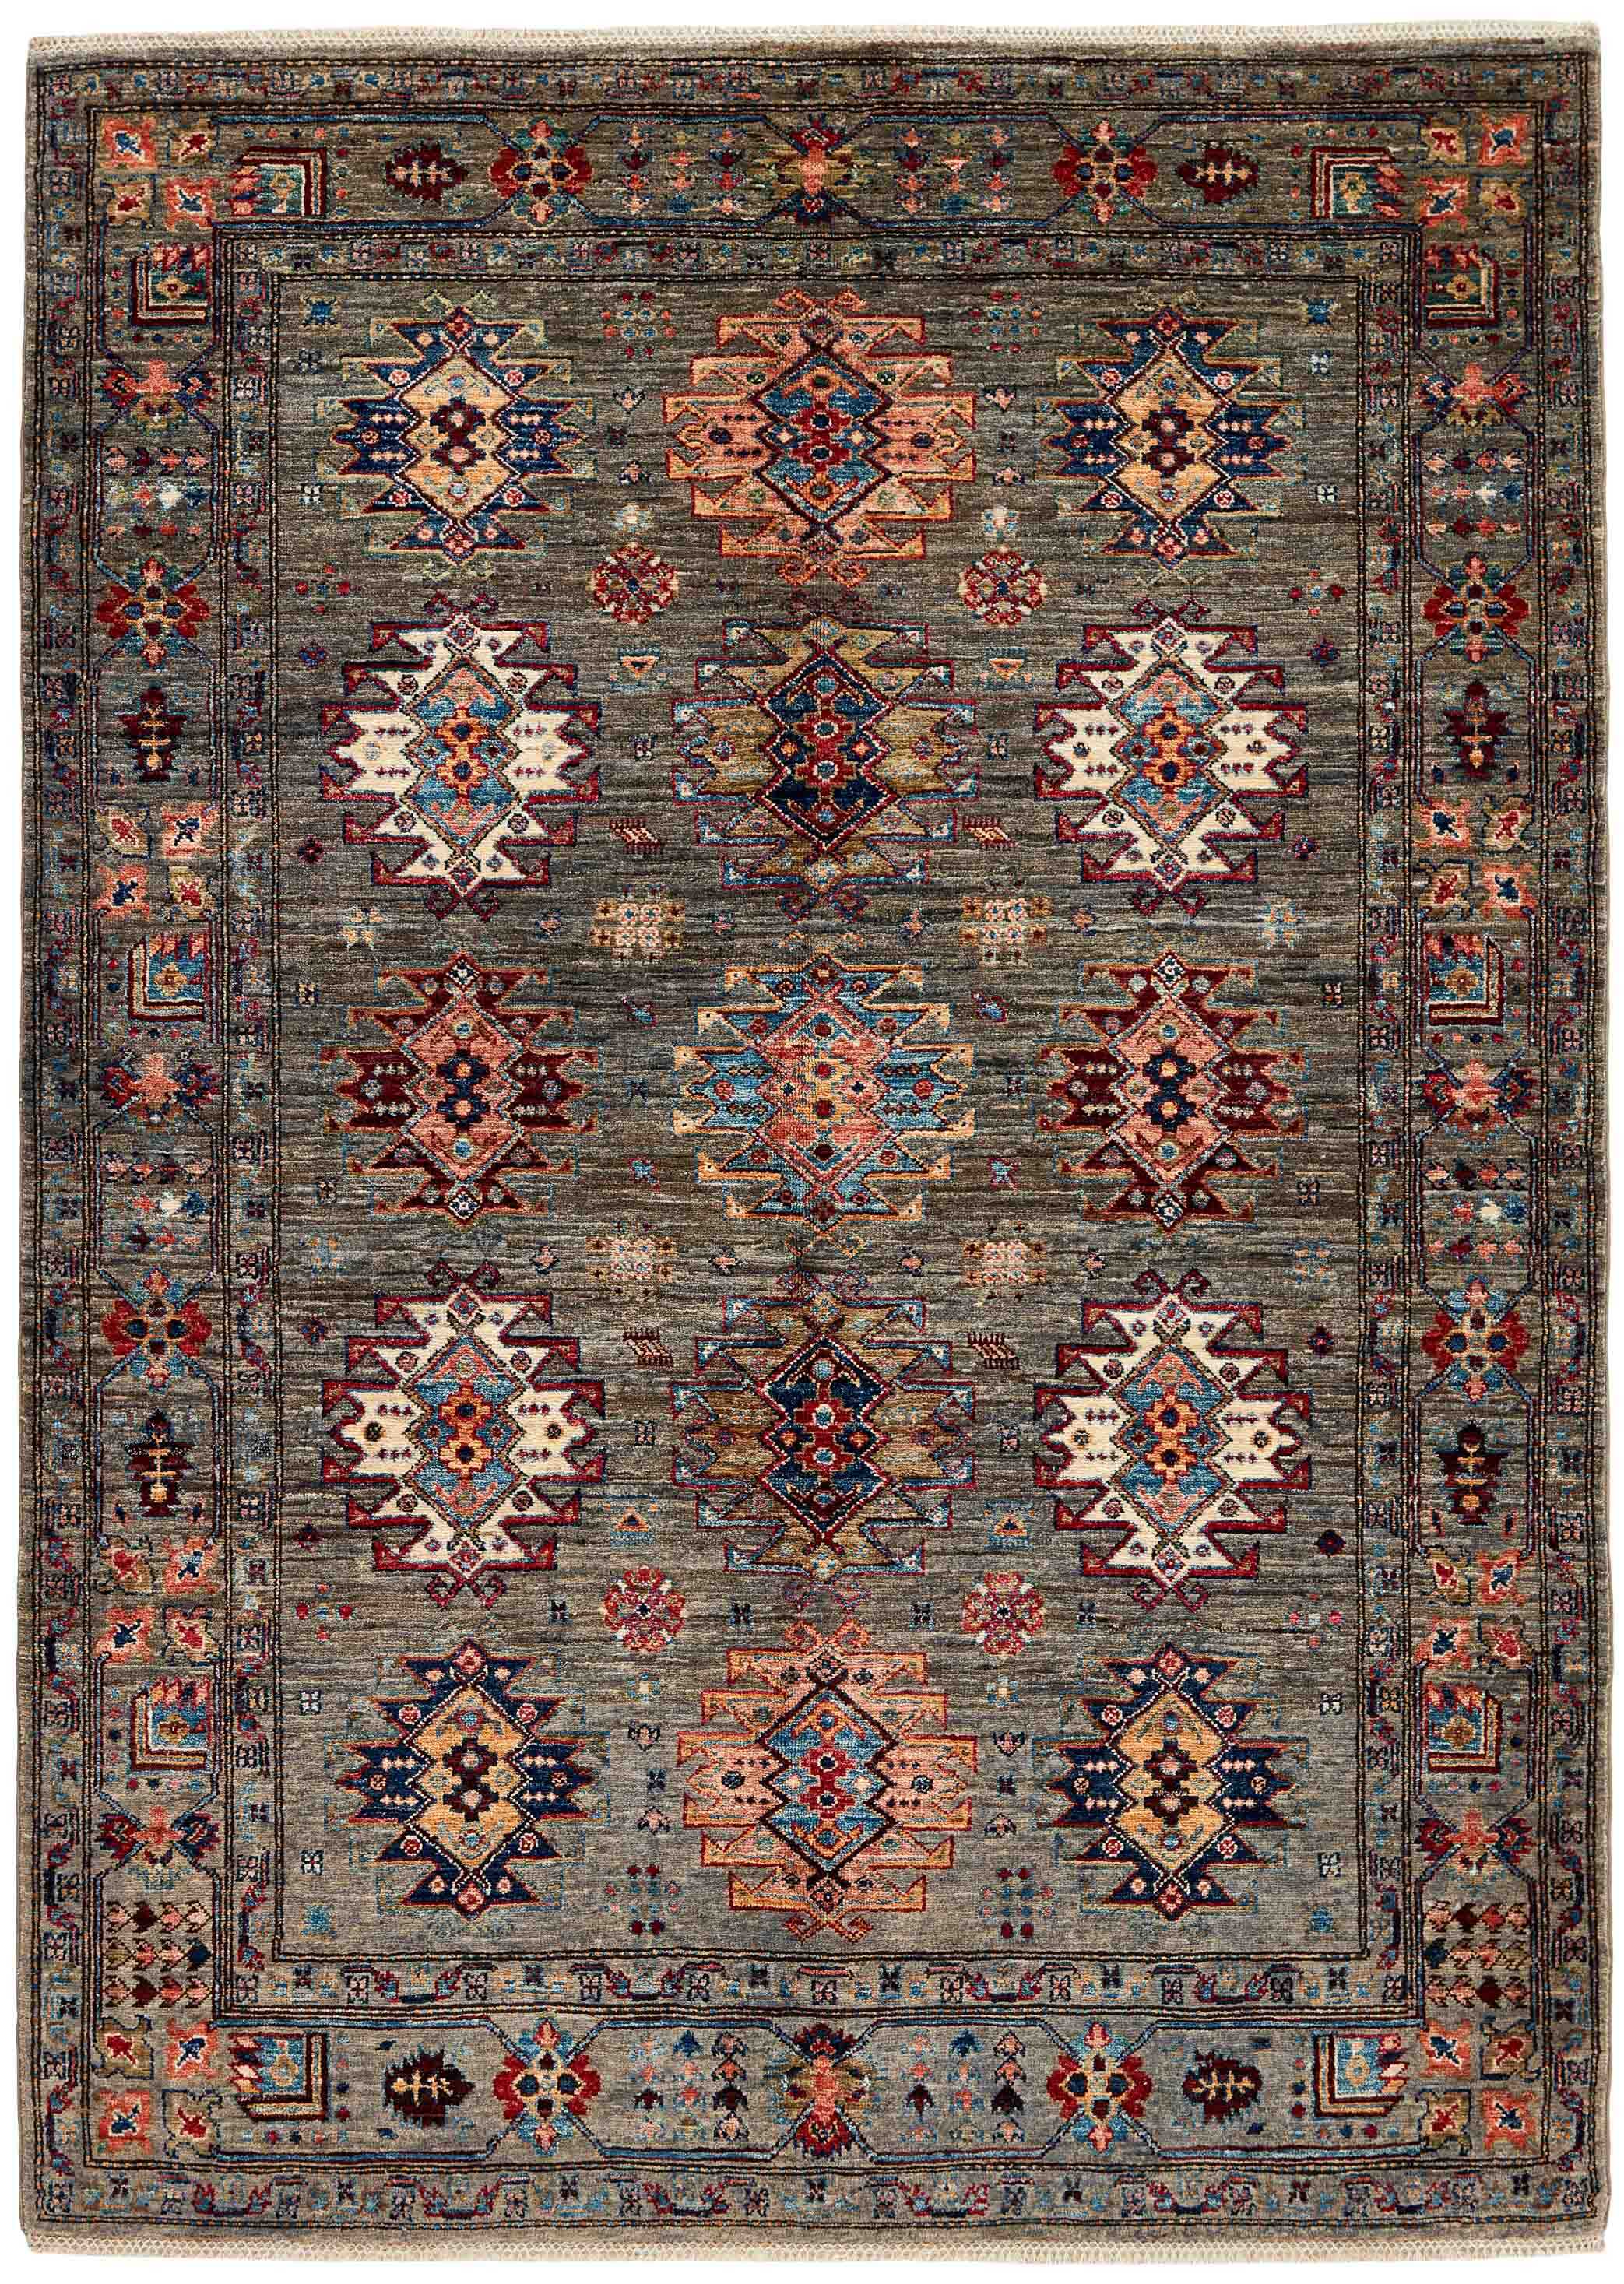 oriental rug with red, yellow, blue, green and beige floral pattern